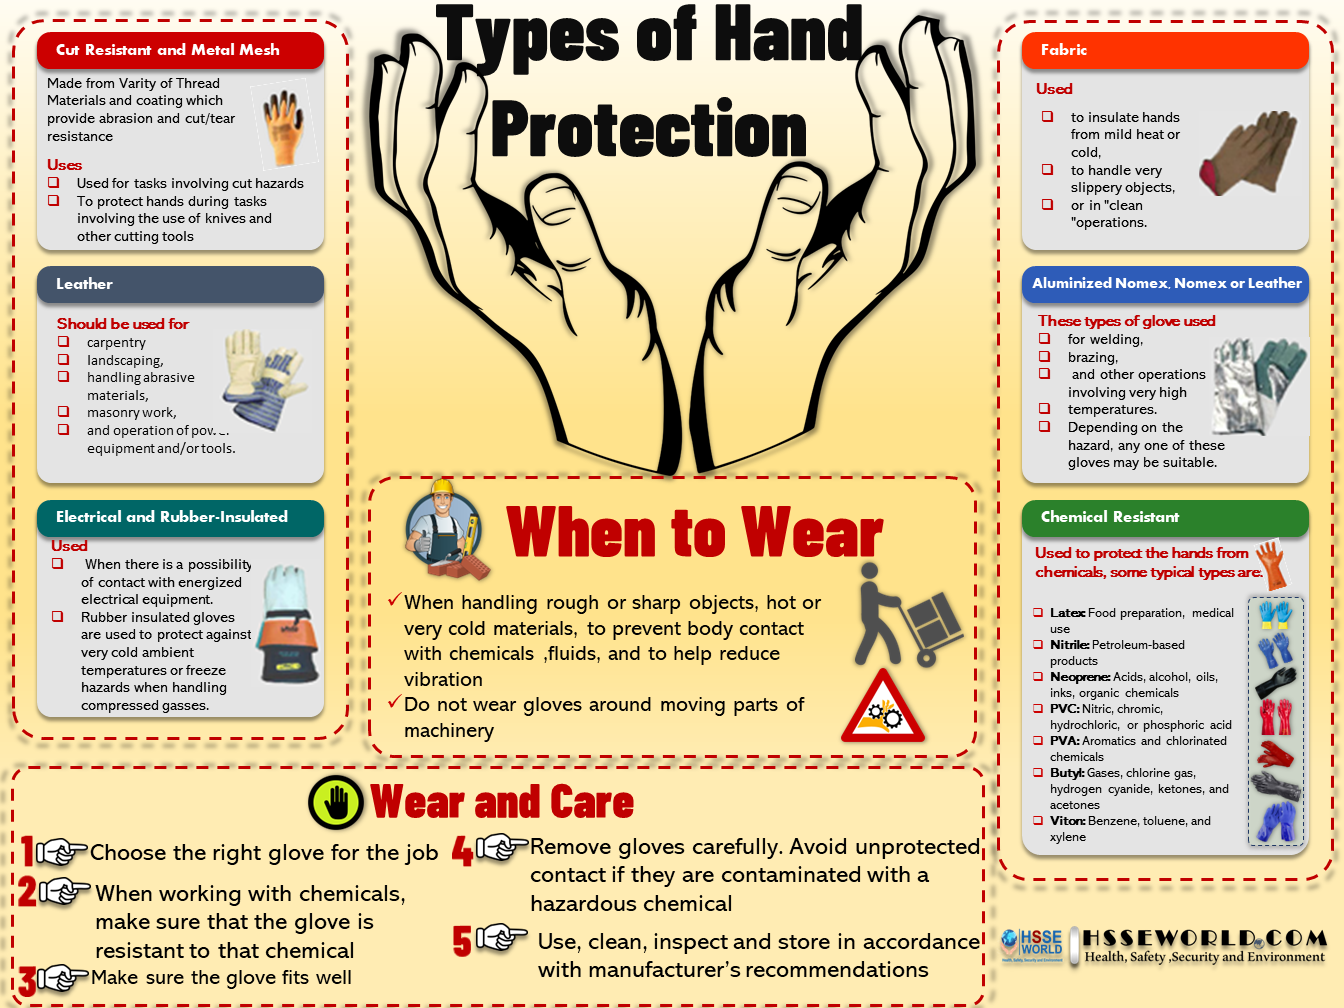 https://hsseworld.com/wp-content/uploads/2020/12/Types-of-Hand-Protection.png